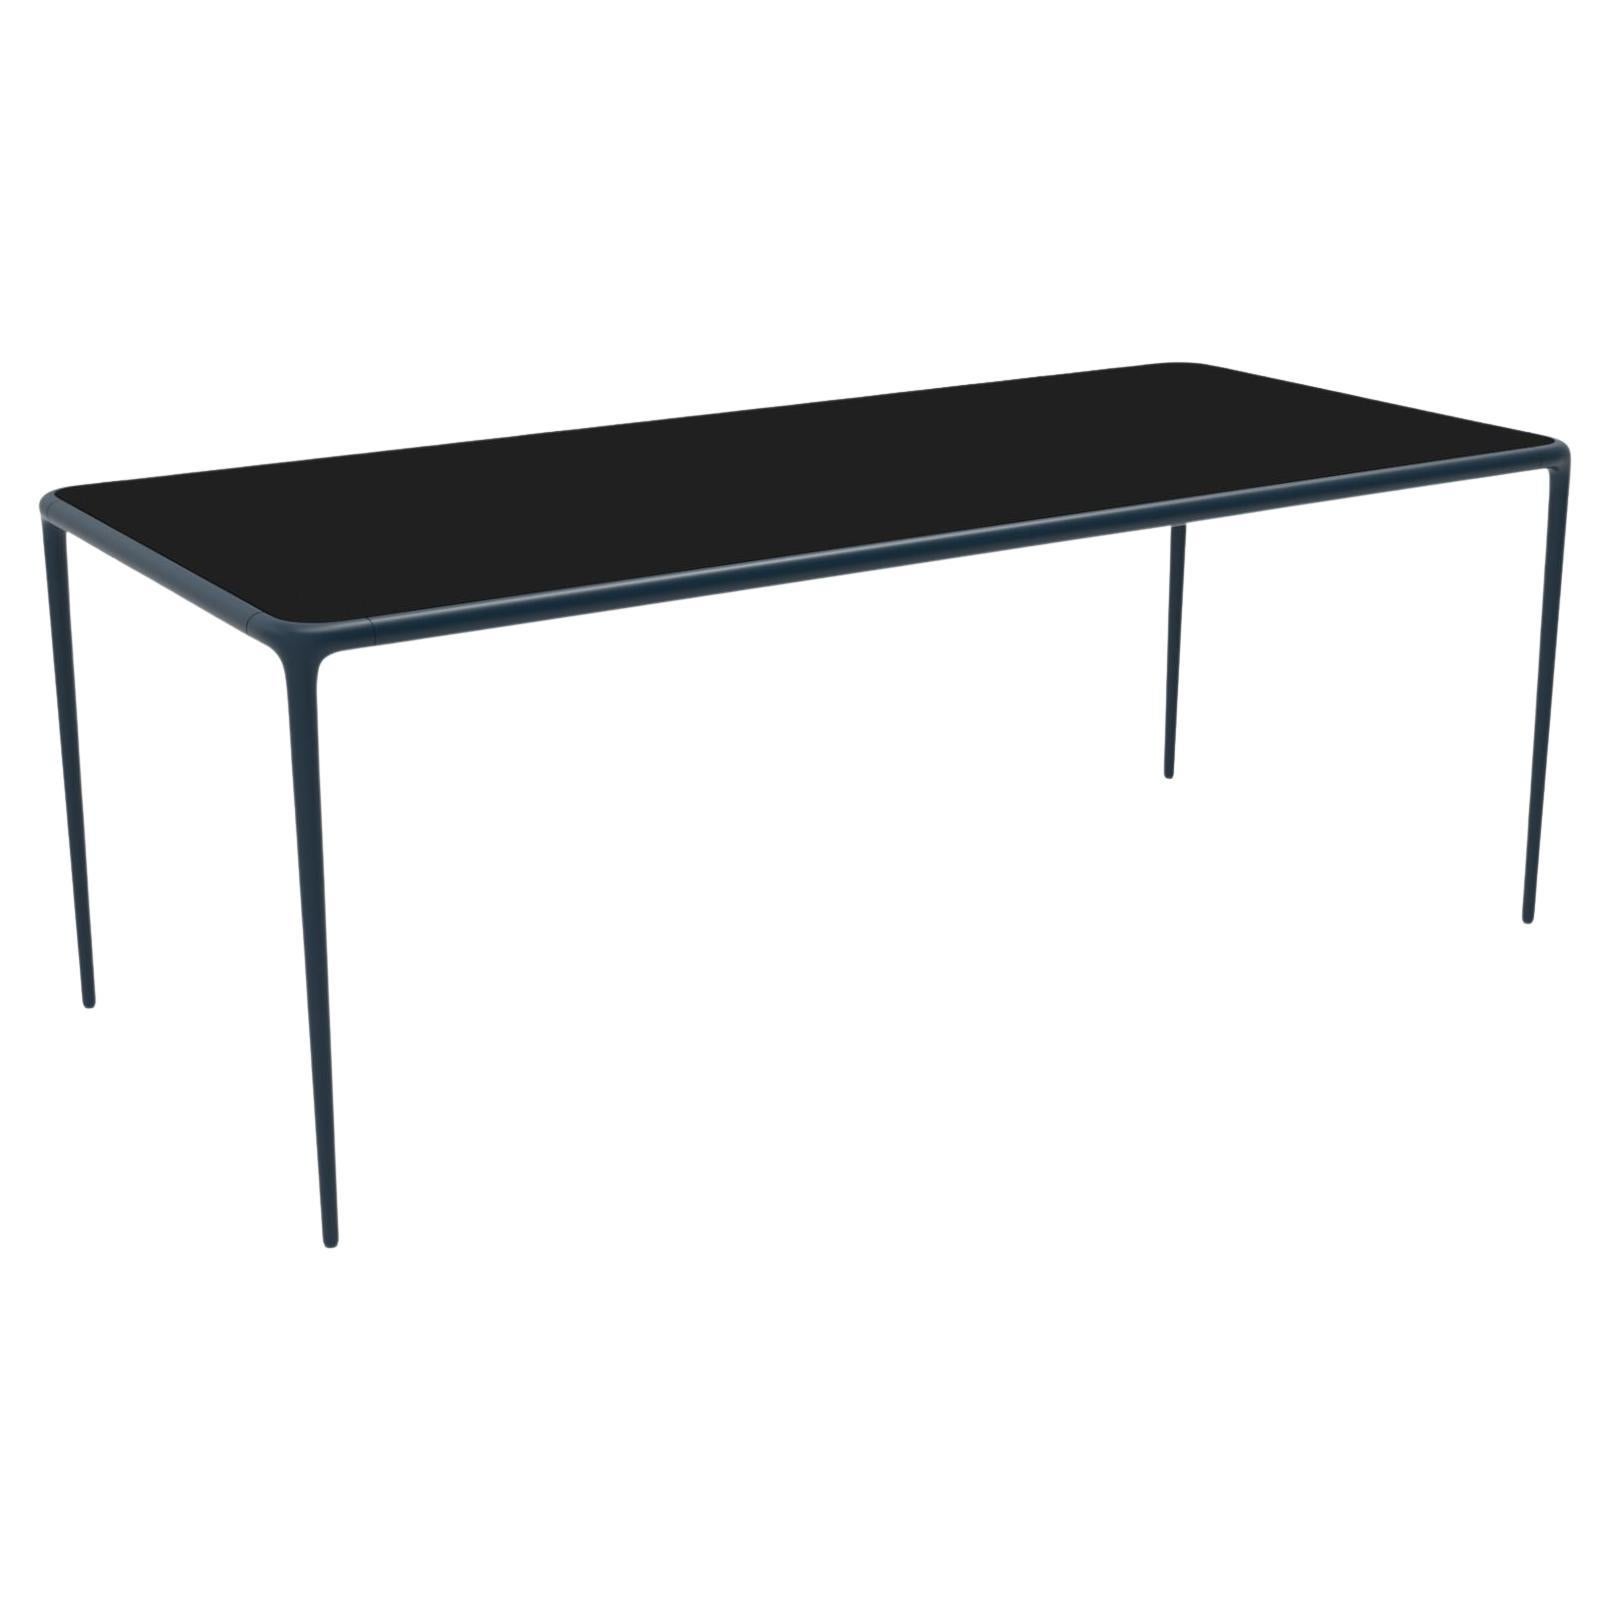 Xaloc Navy Glass Top Table 200 by Mowee For Sale